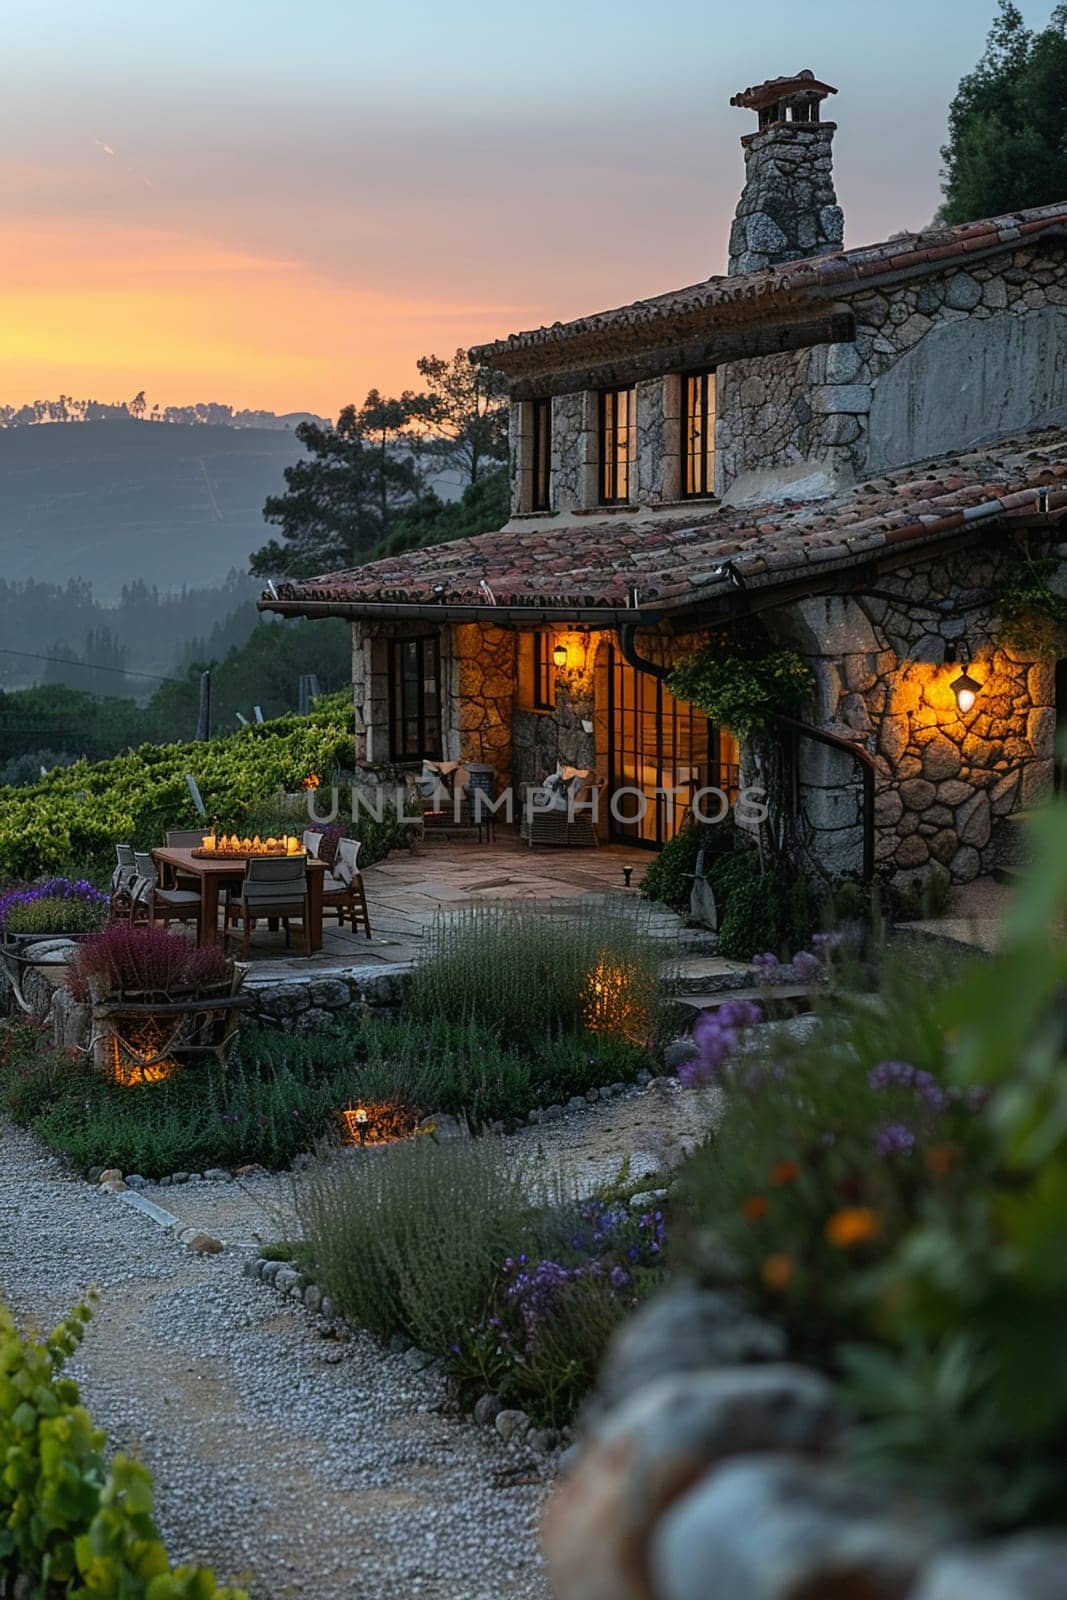 Rustic Winery Offering Corporate Retreats and Tastings by Benzoix